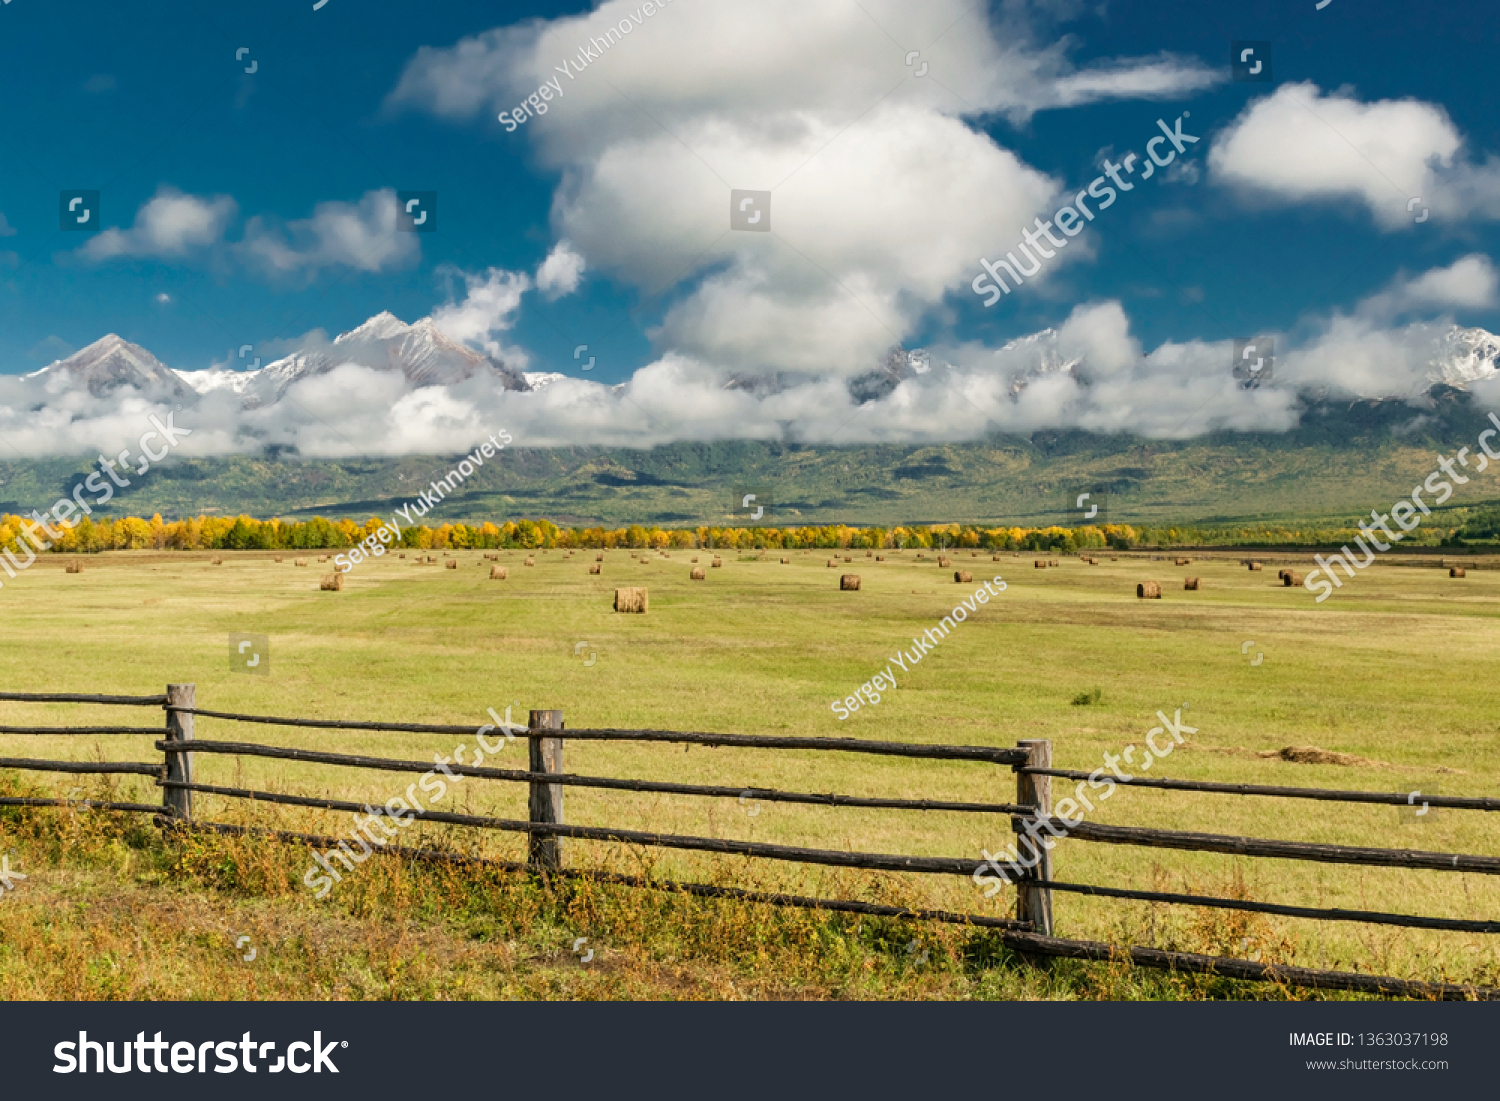 Amazing mountain landscape with cloudy sky, lath fence in the foreground and haystacks, Siberia, Irkutsk region, Russia #1363037198